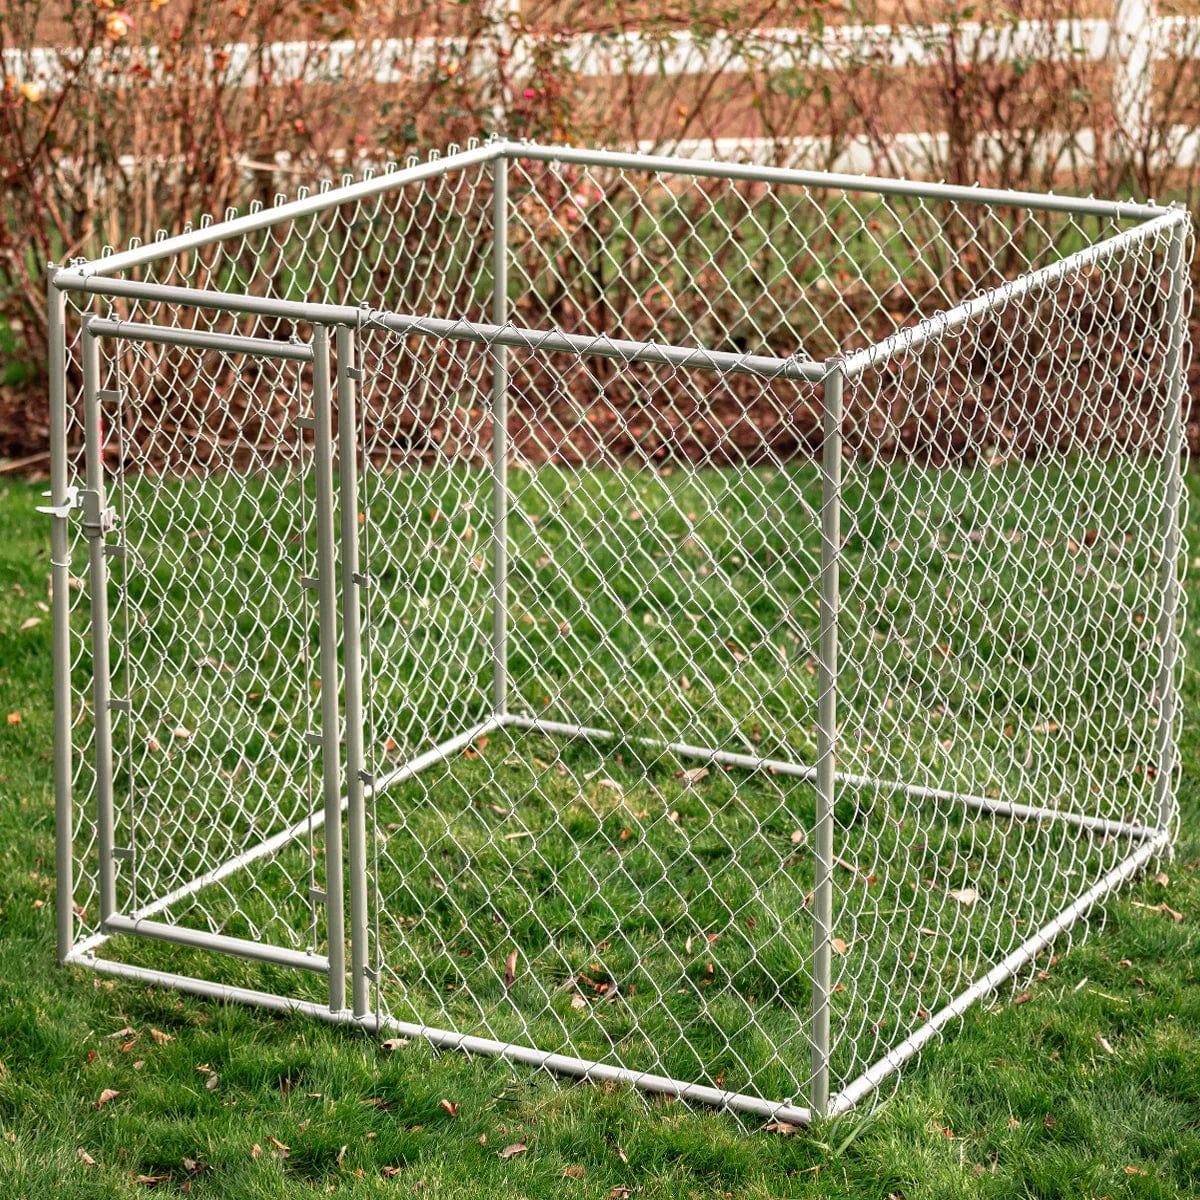 Lucky Dog Galvanized Chain Link w/PC Frame Kit in a Box 5'L x 5'W x 4'H